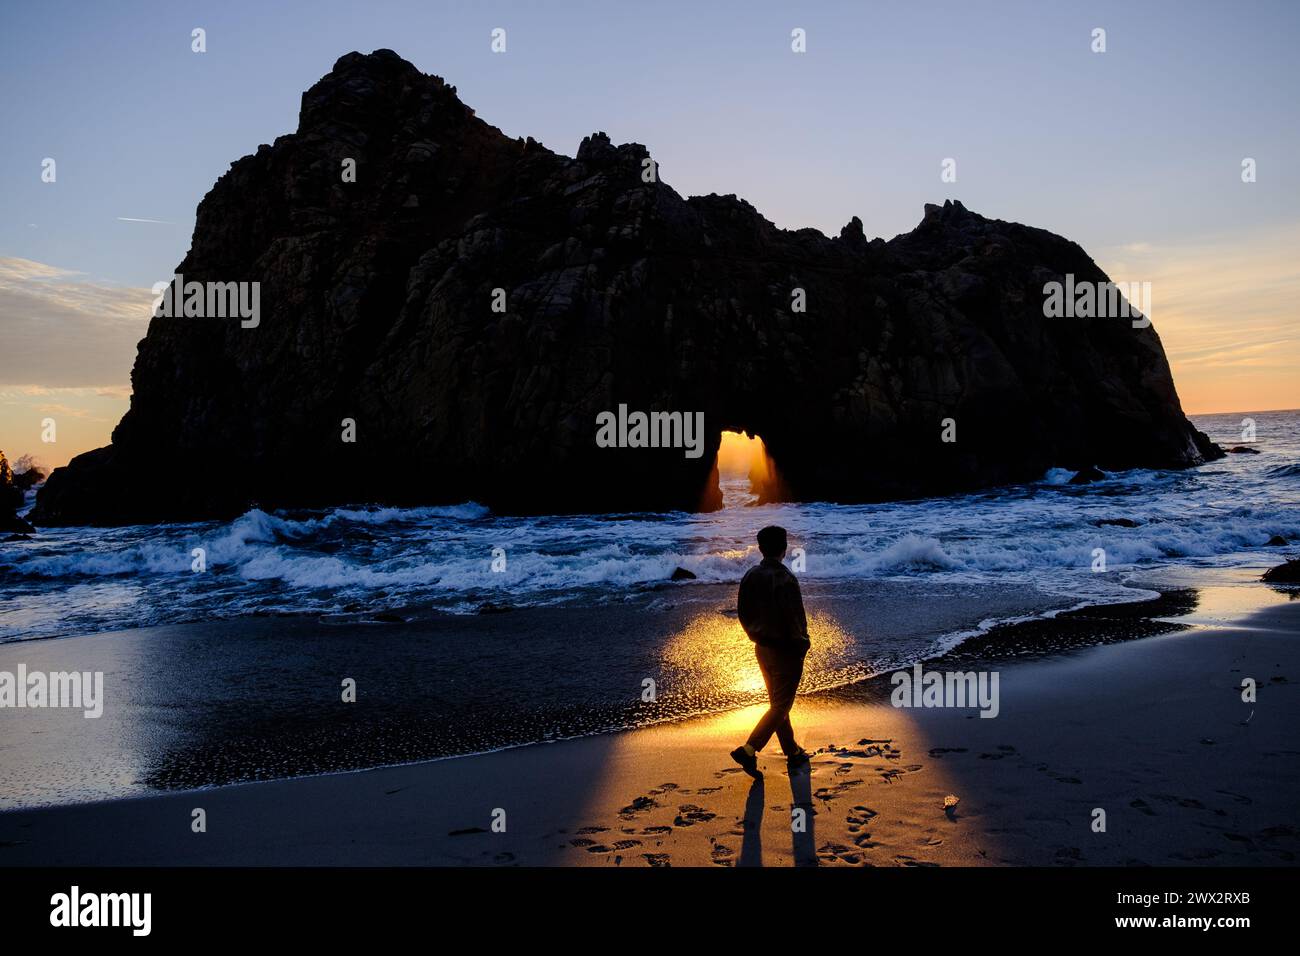 Sunset illuminates person in front of Window in the Rock feature of Keyhole Arch at Pfeiffer Beach in Big Sur on the Pacific Ocean in California, USA. Stock Photo